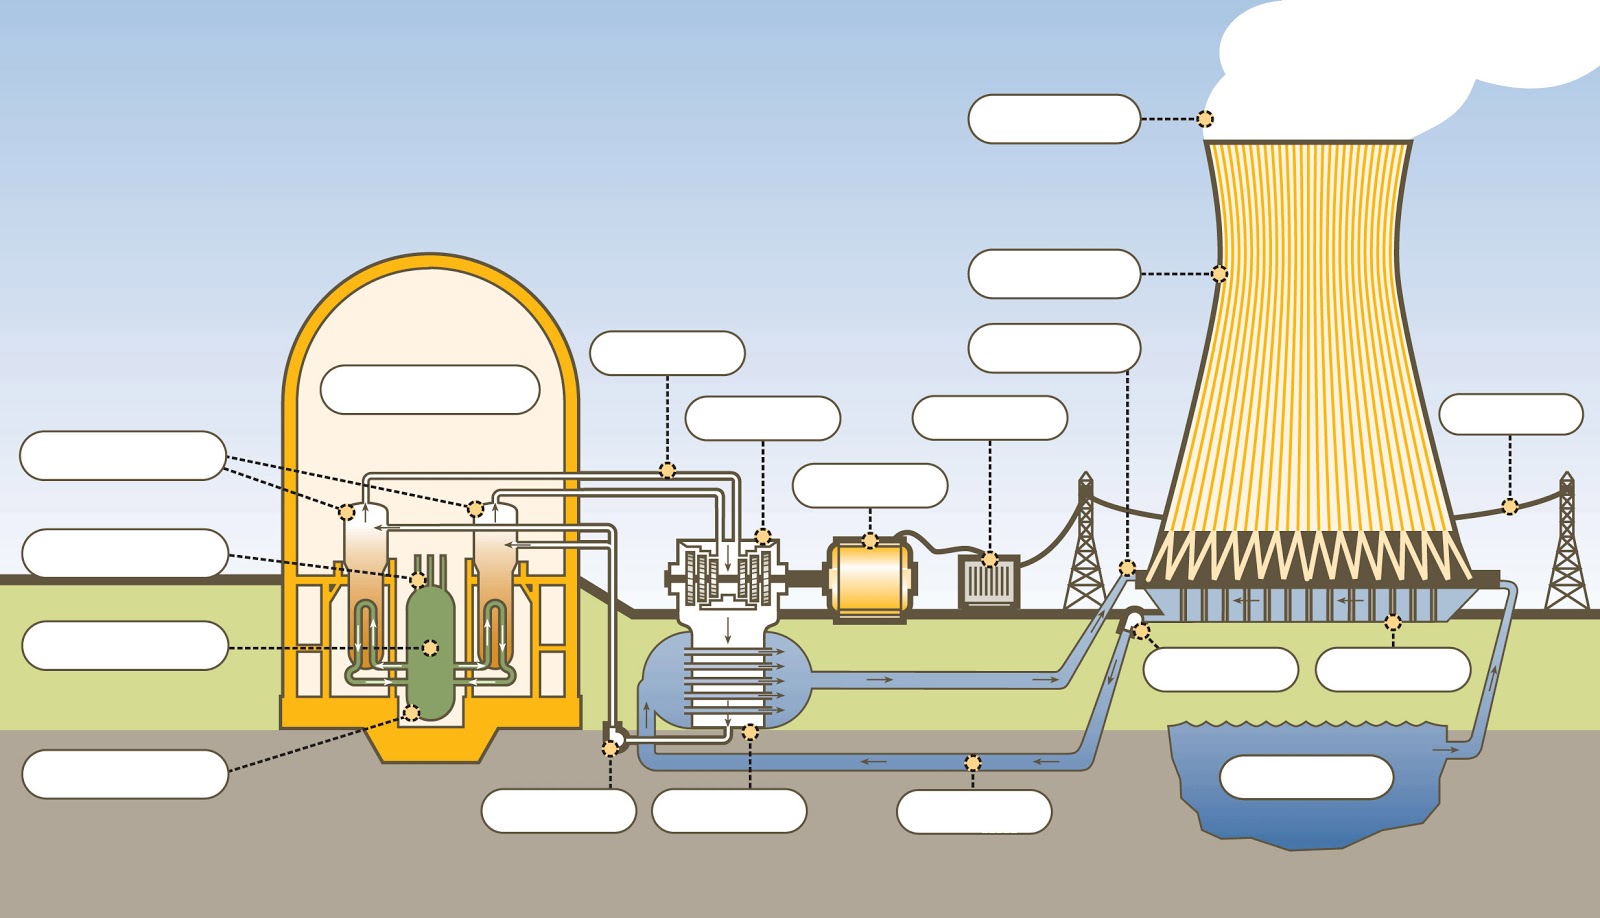 Turbines Worksheet along with how a nuclear power plant works diagram 